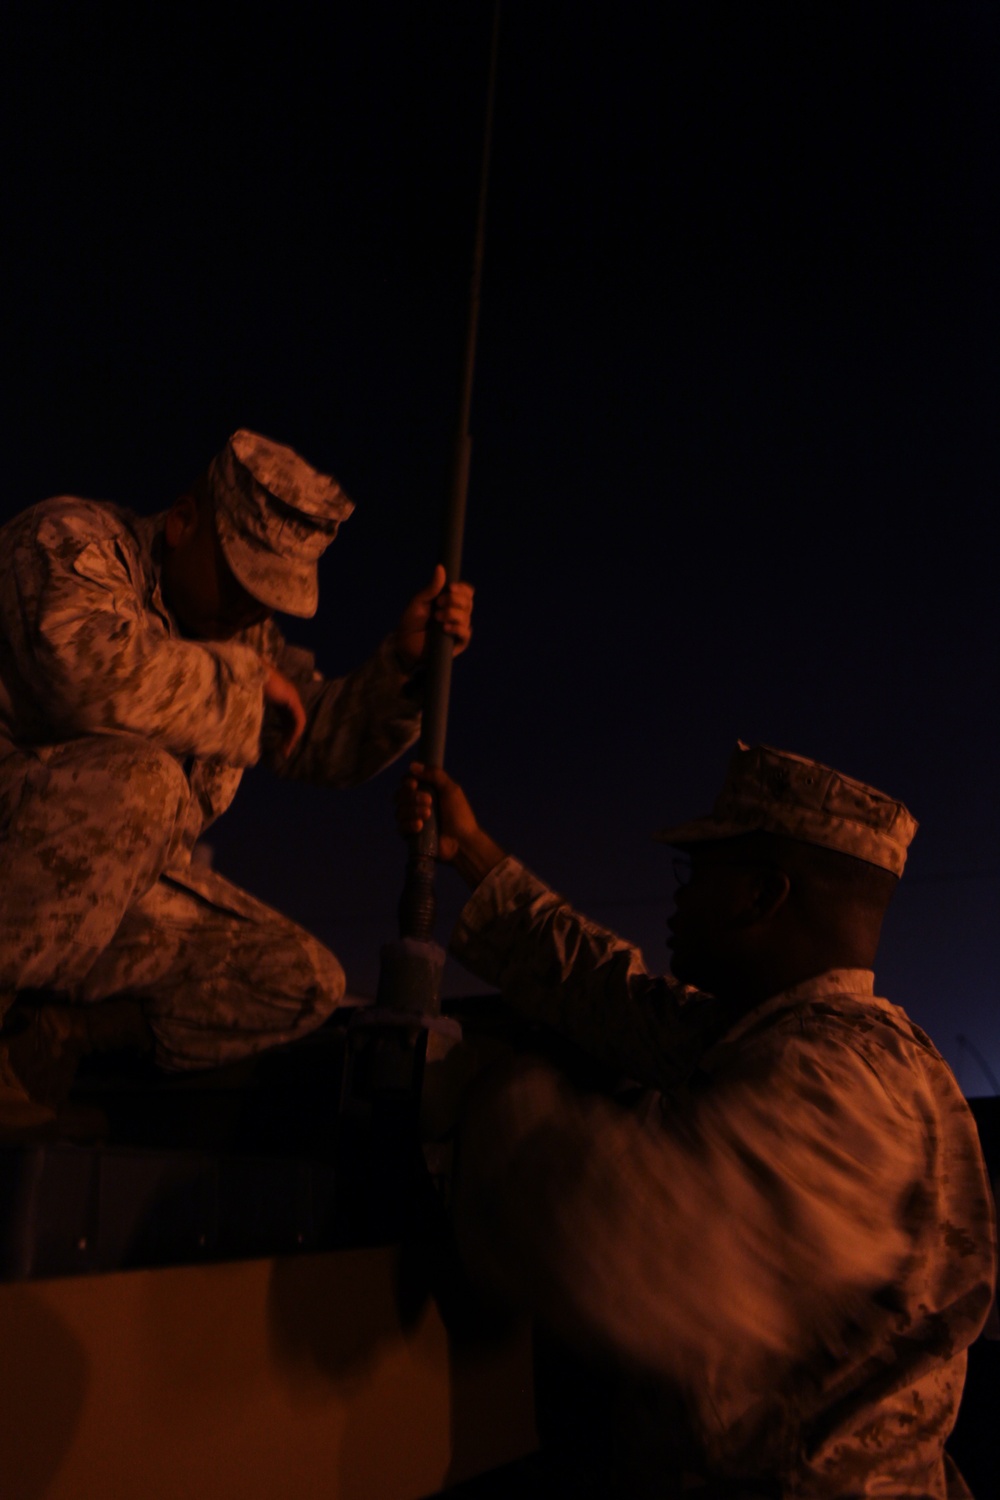 22nd Marine Expeditionary Unit Conducts Communications Exercise